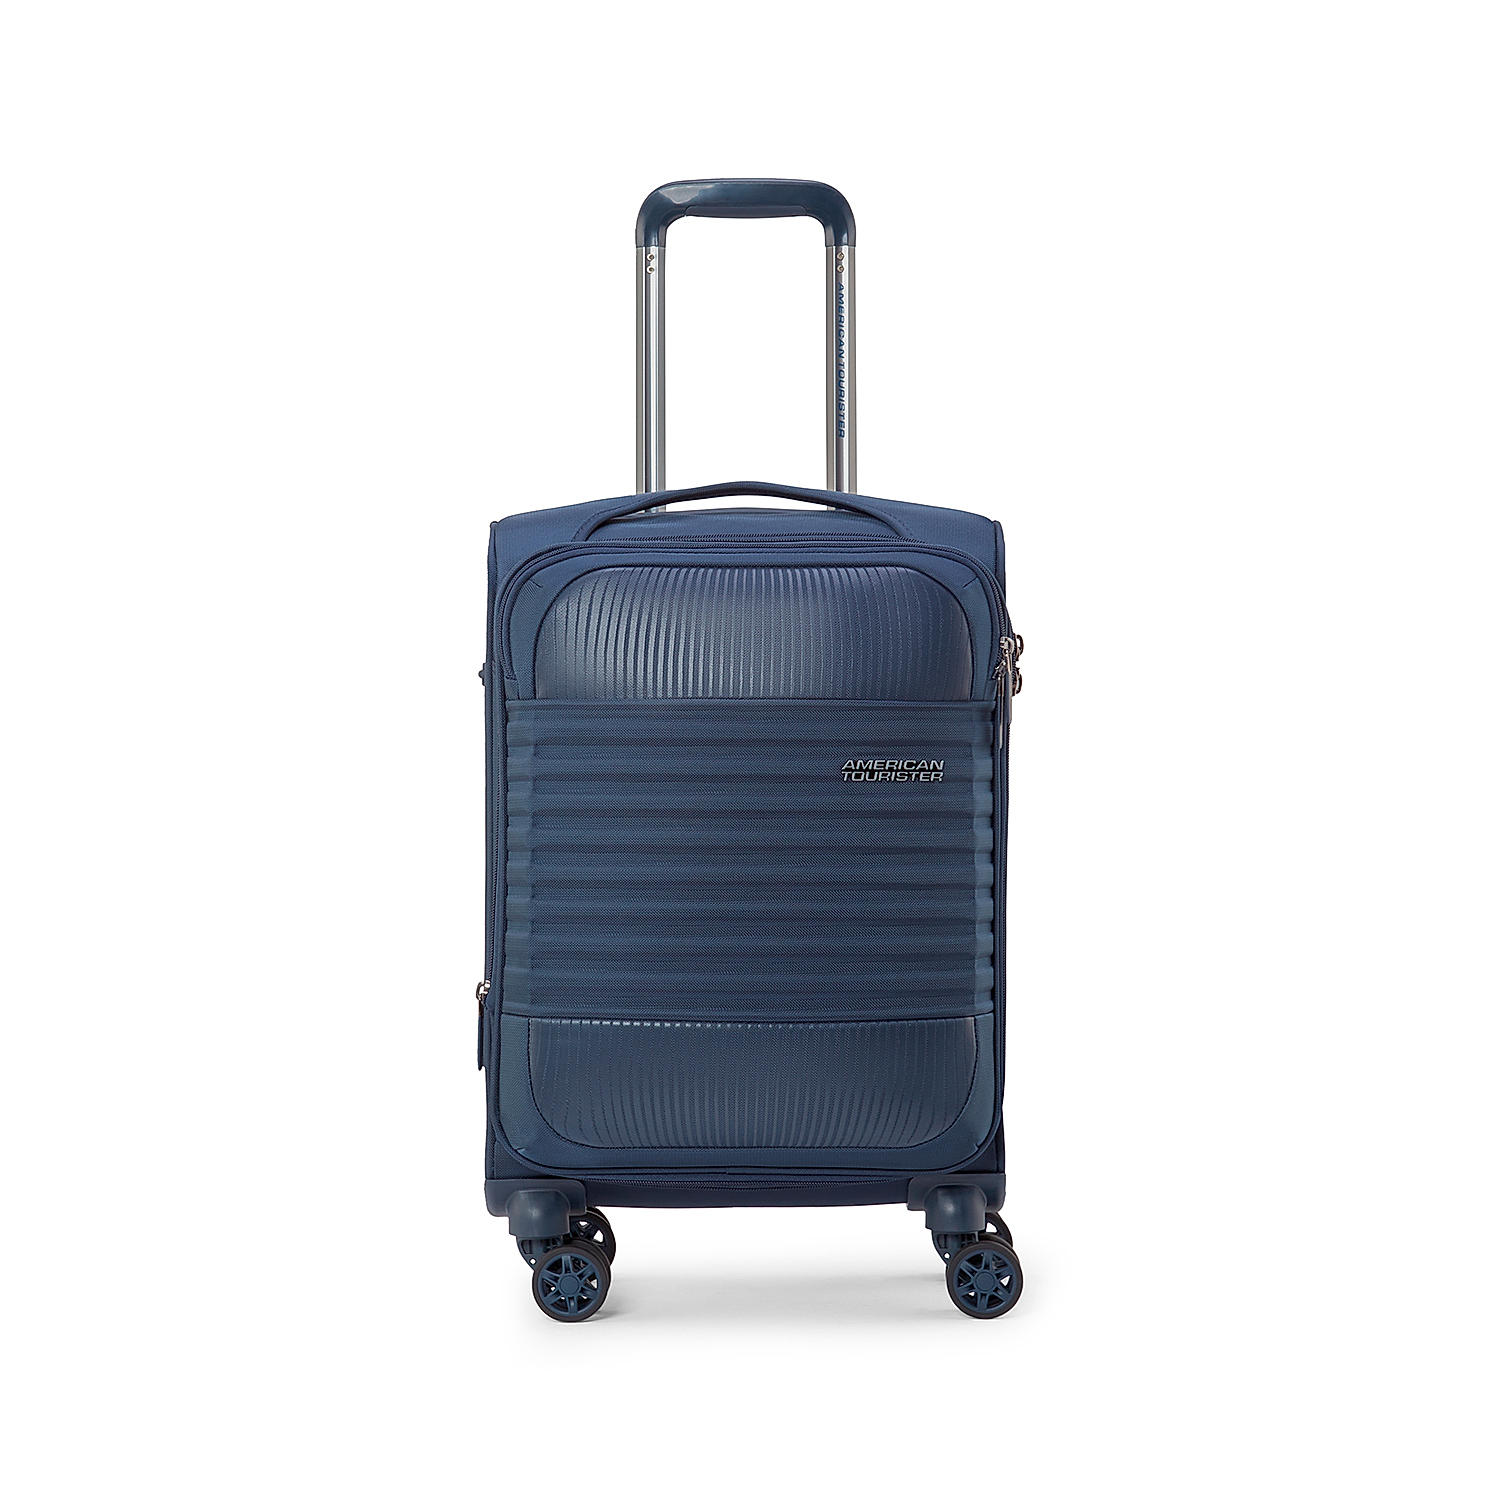 Red Laptop Overnighter Trolley Bags - Buy Trolley Bags & Travel Luggage  Online - Arrival Luggage